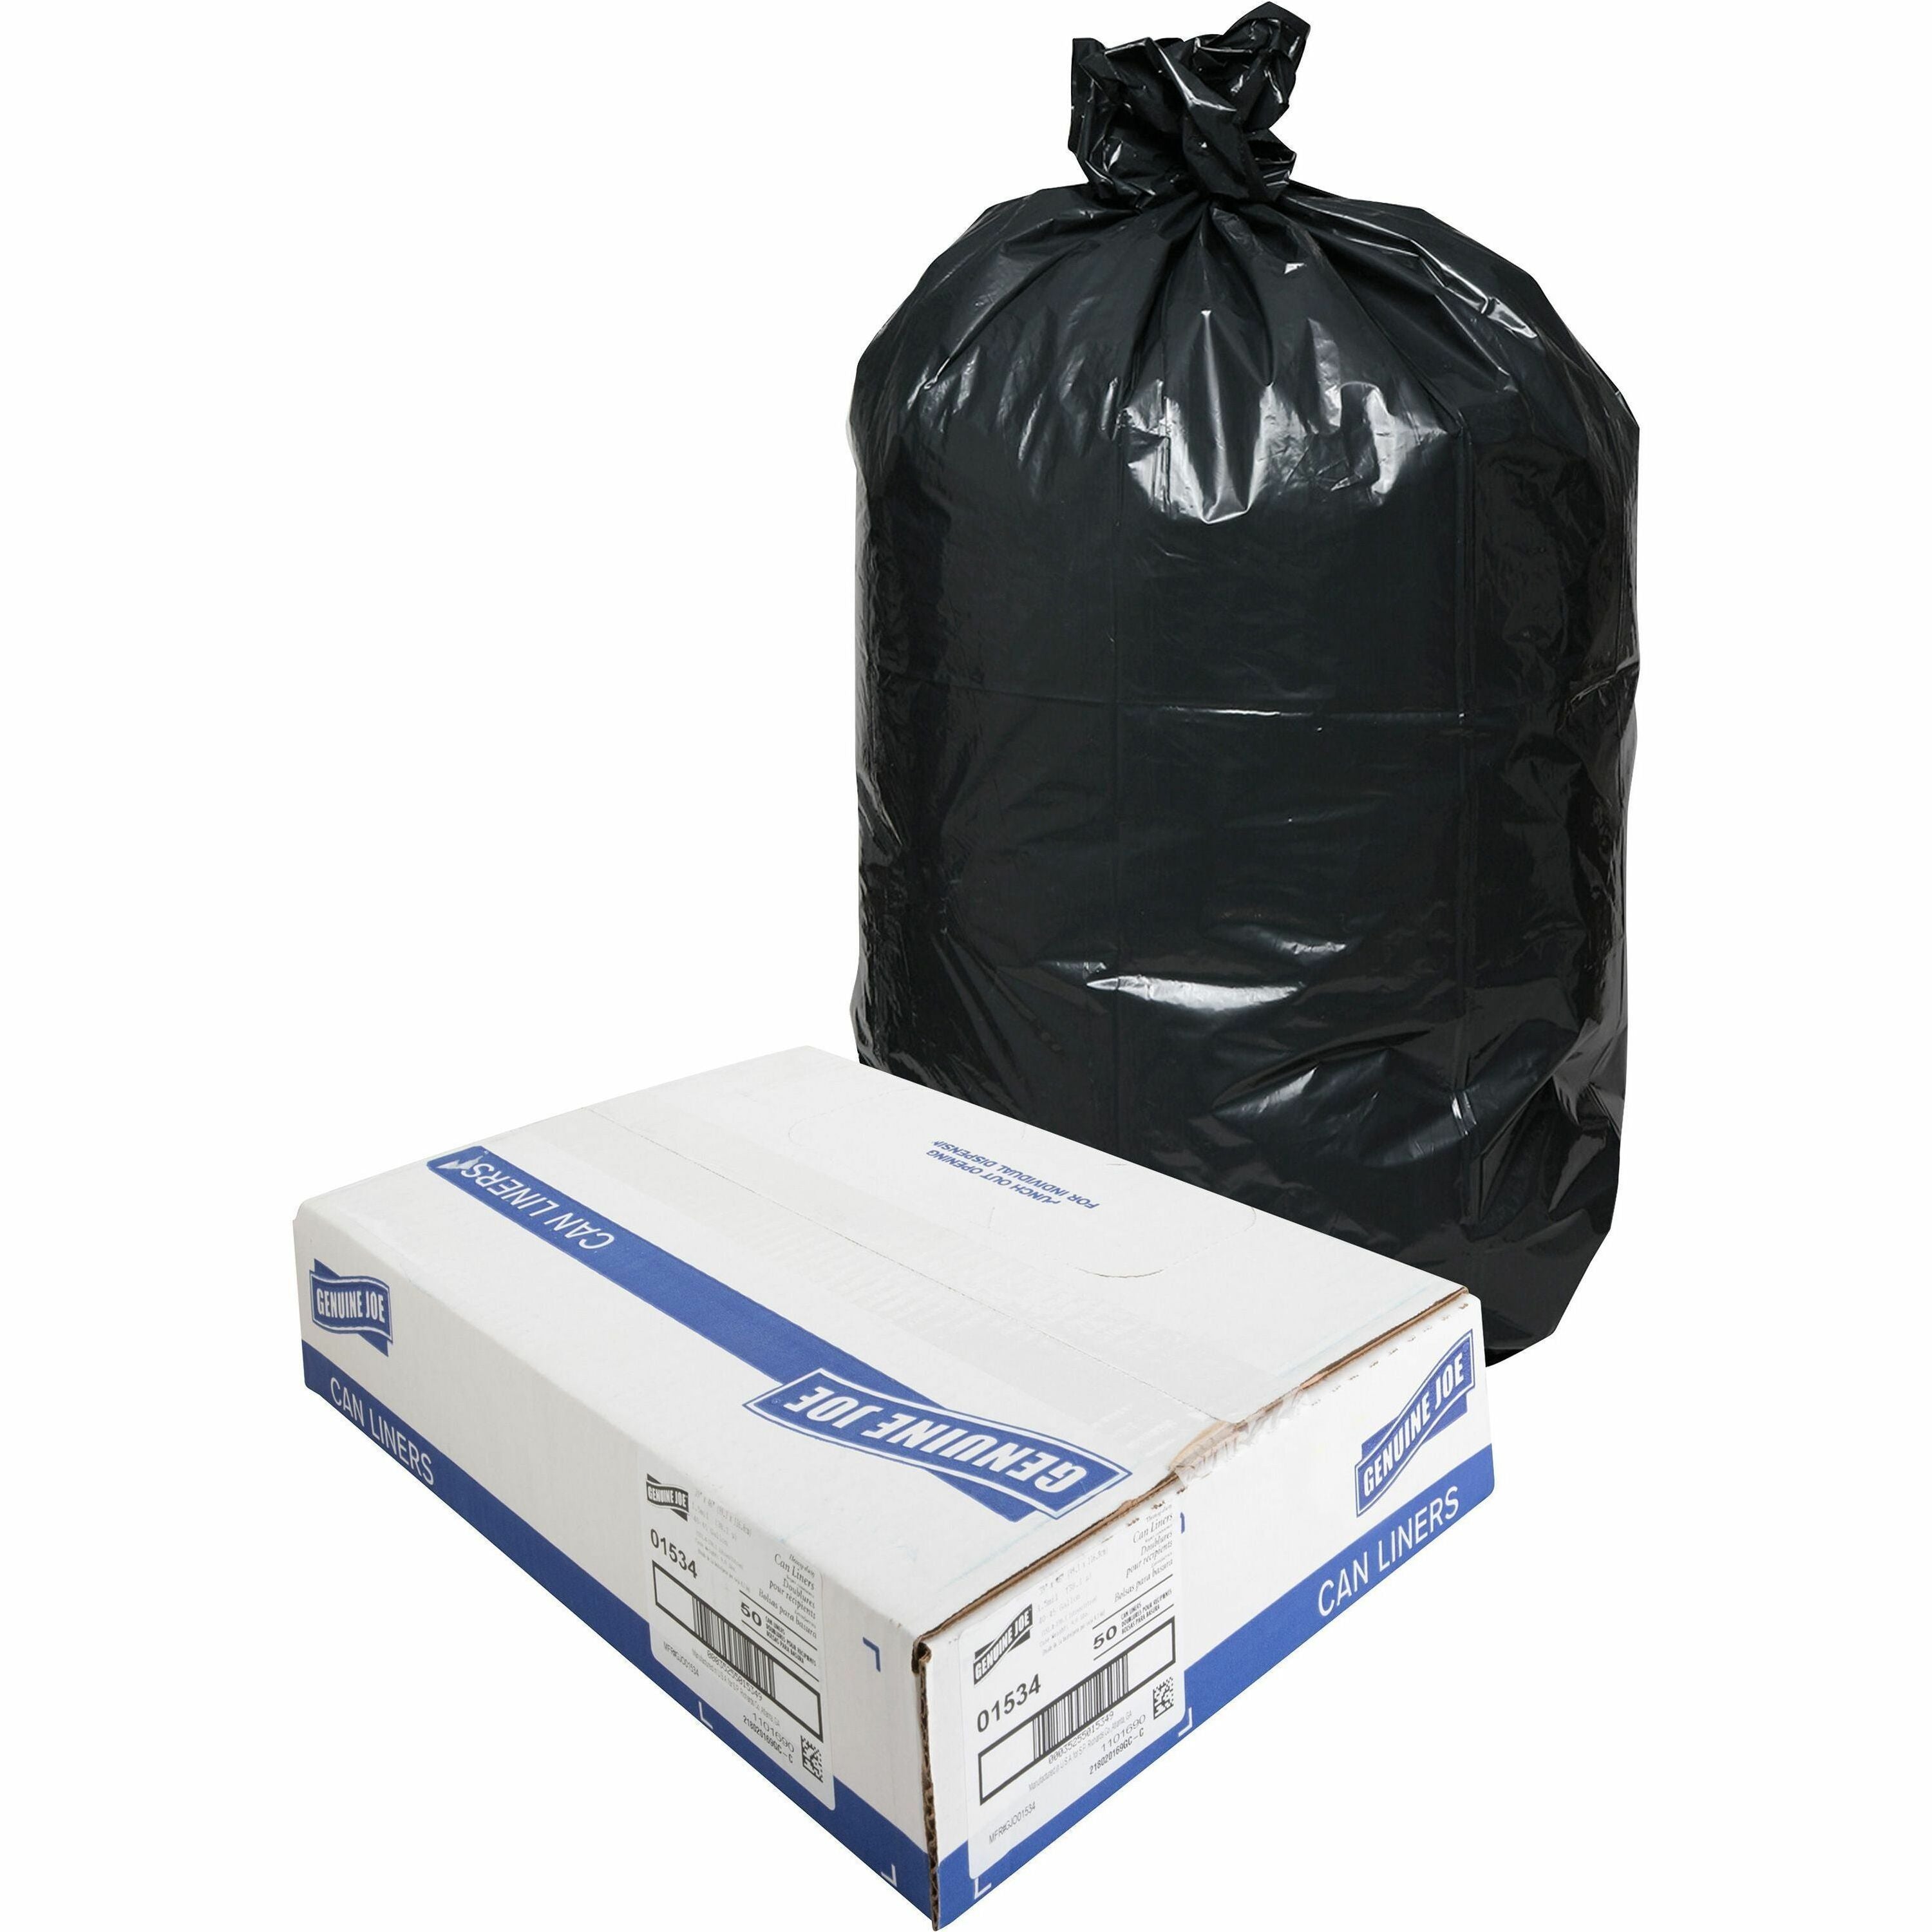 Genuine Joe Heavy-Duty Trash Can Liners - Large Size - 45 gal Capacity - 39" Width x 46" Length - 1.50 mil (38 Micron) Thickness - Low Density - Black - 50/Carton - 